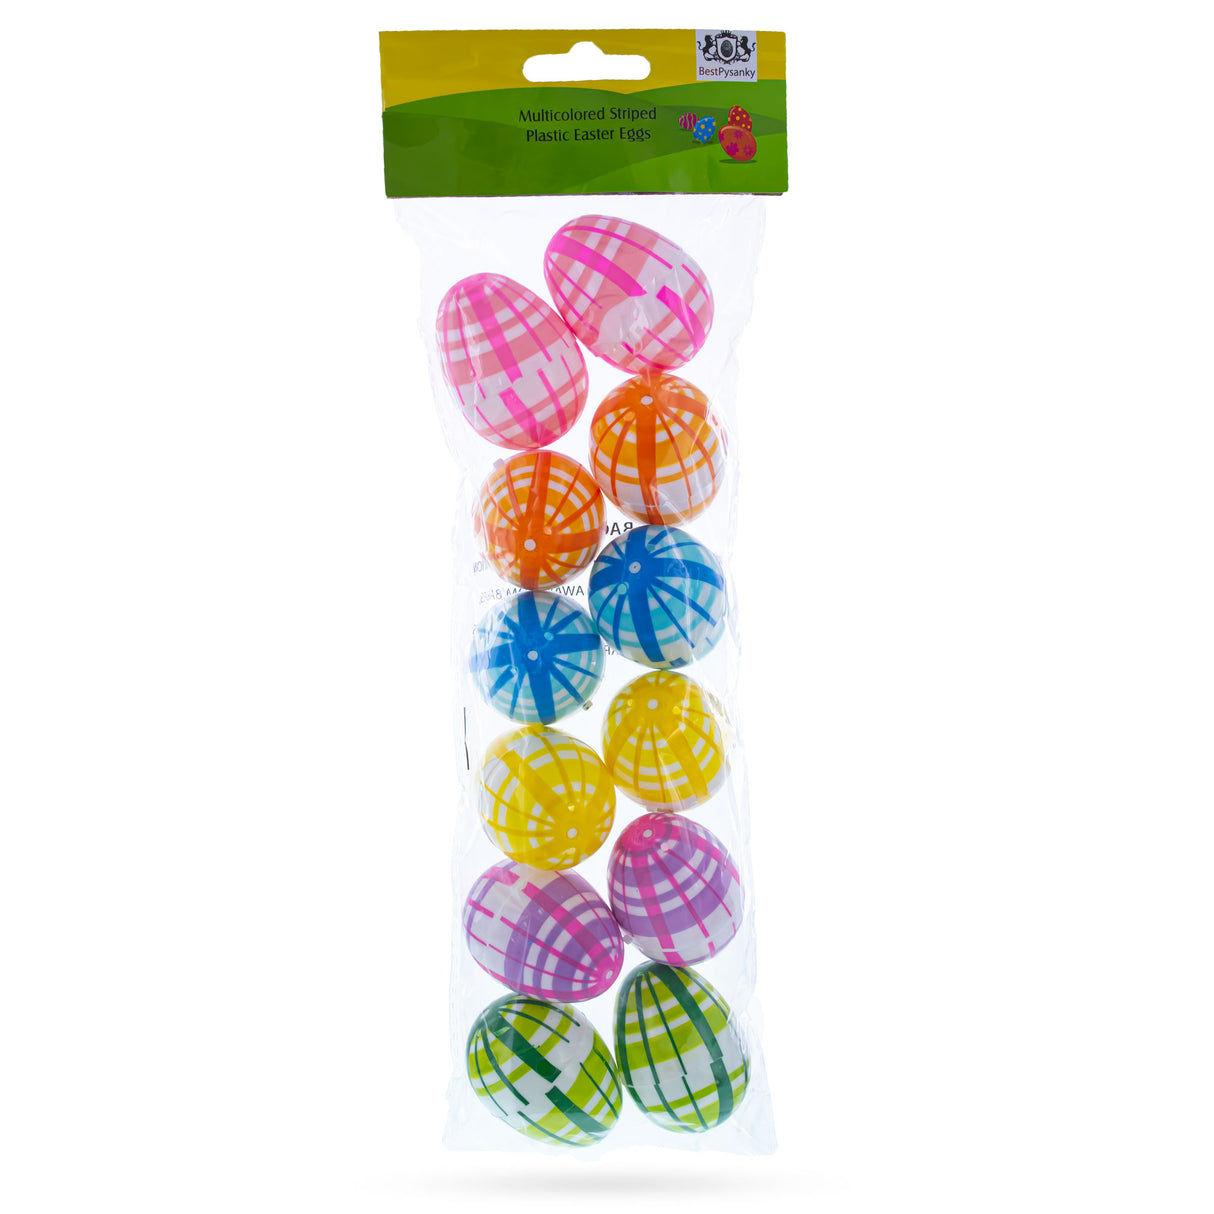 Shop Set of 12 Multicolored Plaid Plastic Easter Eggs 2.25 Inches. Buy Easter Eggs Plastic Multi Oval Plastic for Sale by Online Gift Shop BestPysanky plastic Easter eggs plaid multicolored fillable spring celebration egg hunt candy toys festive durable bright colors pastels children's party Easter decor